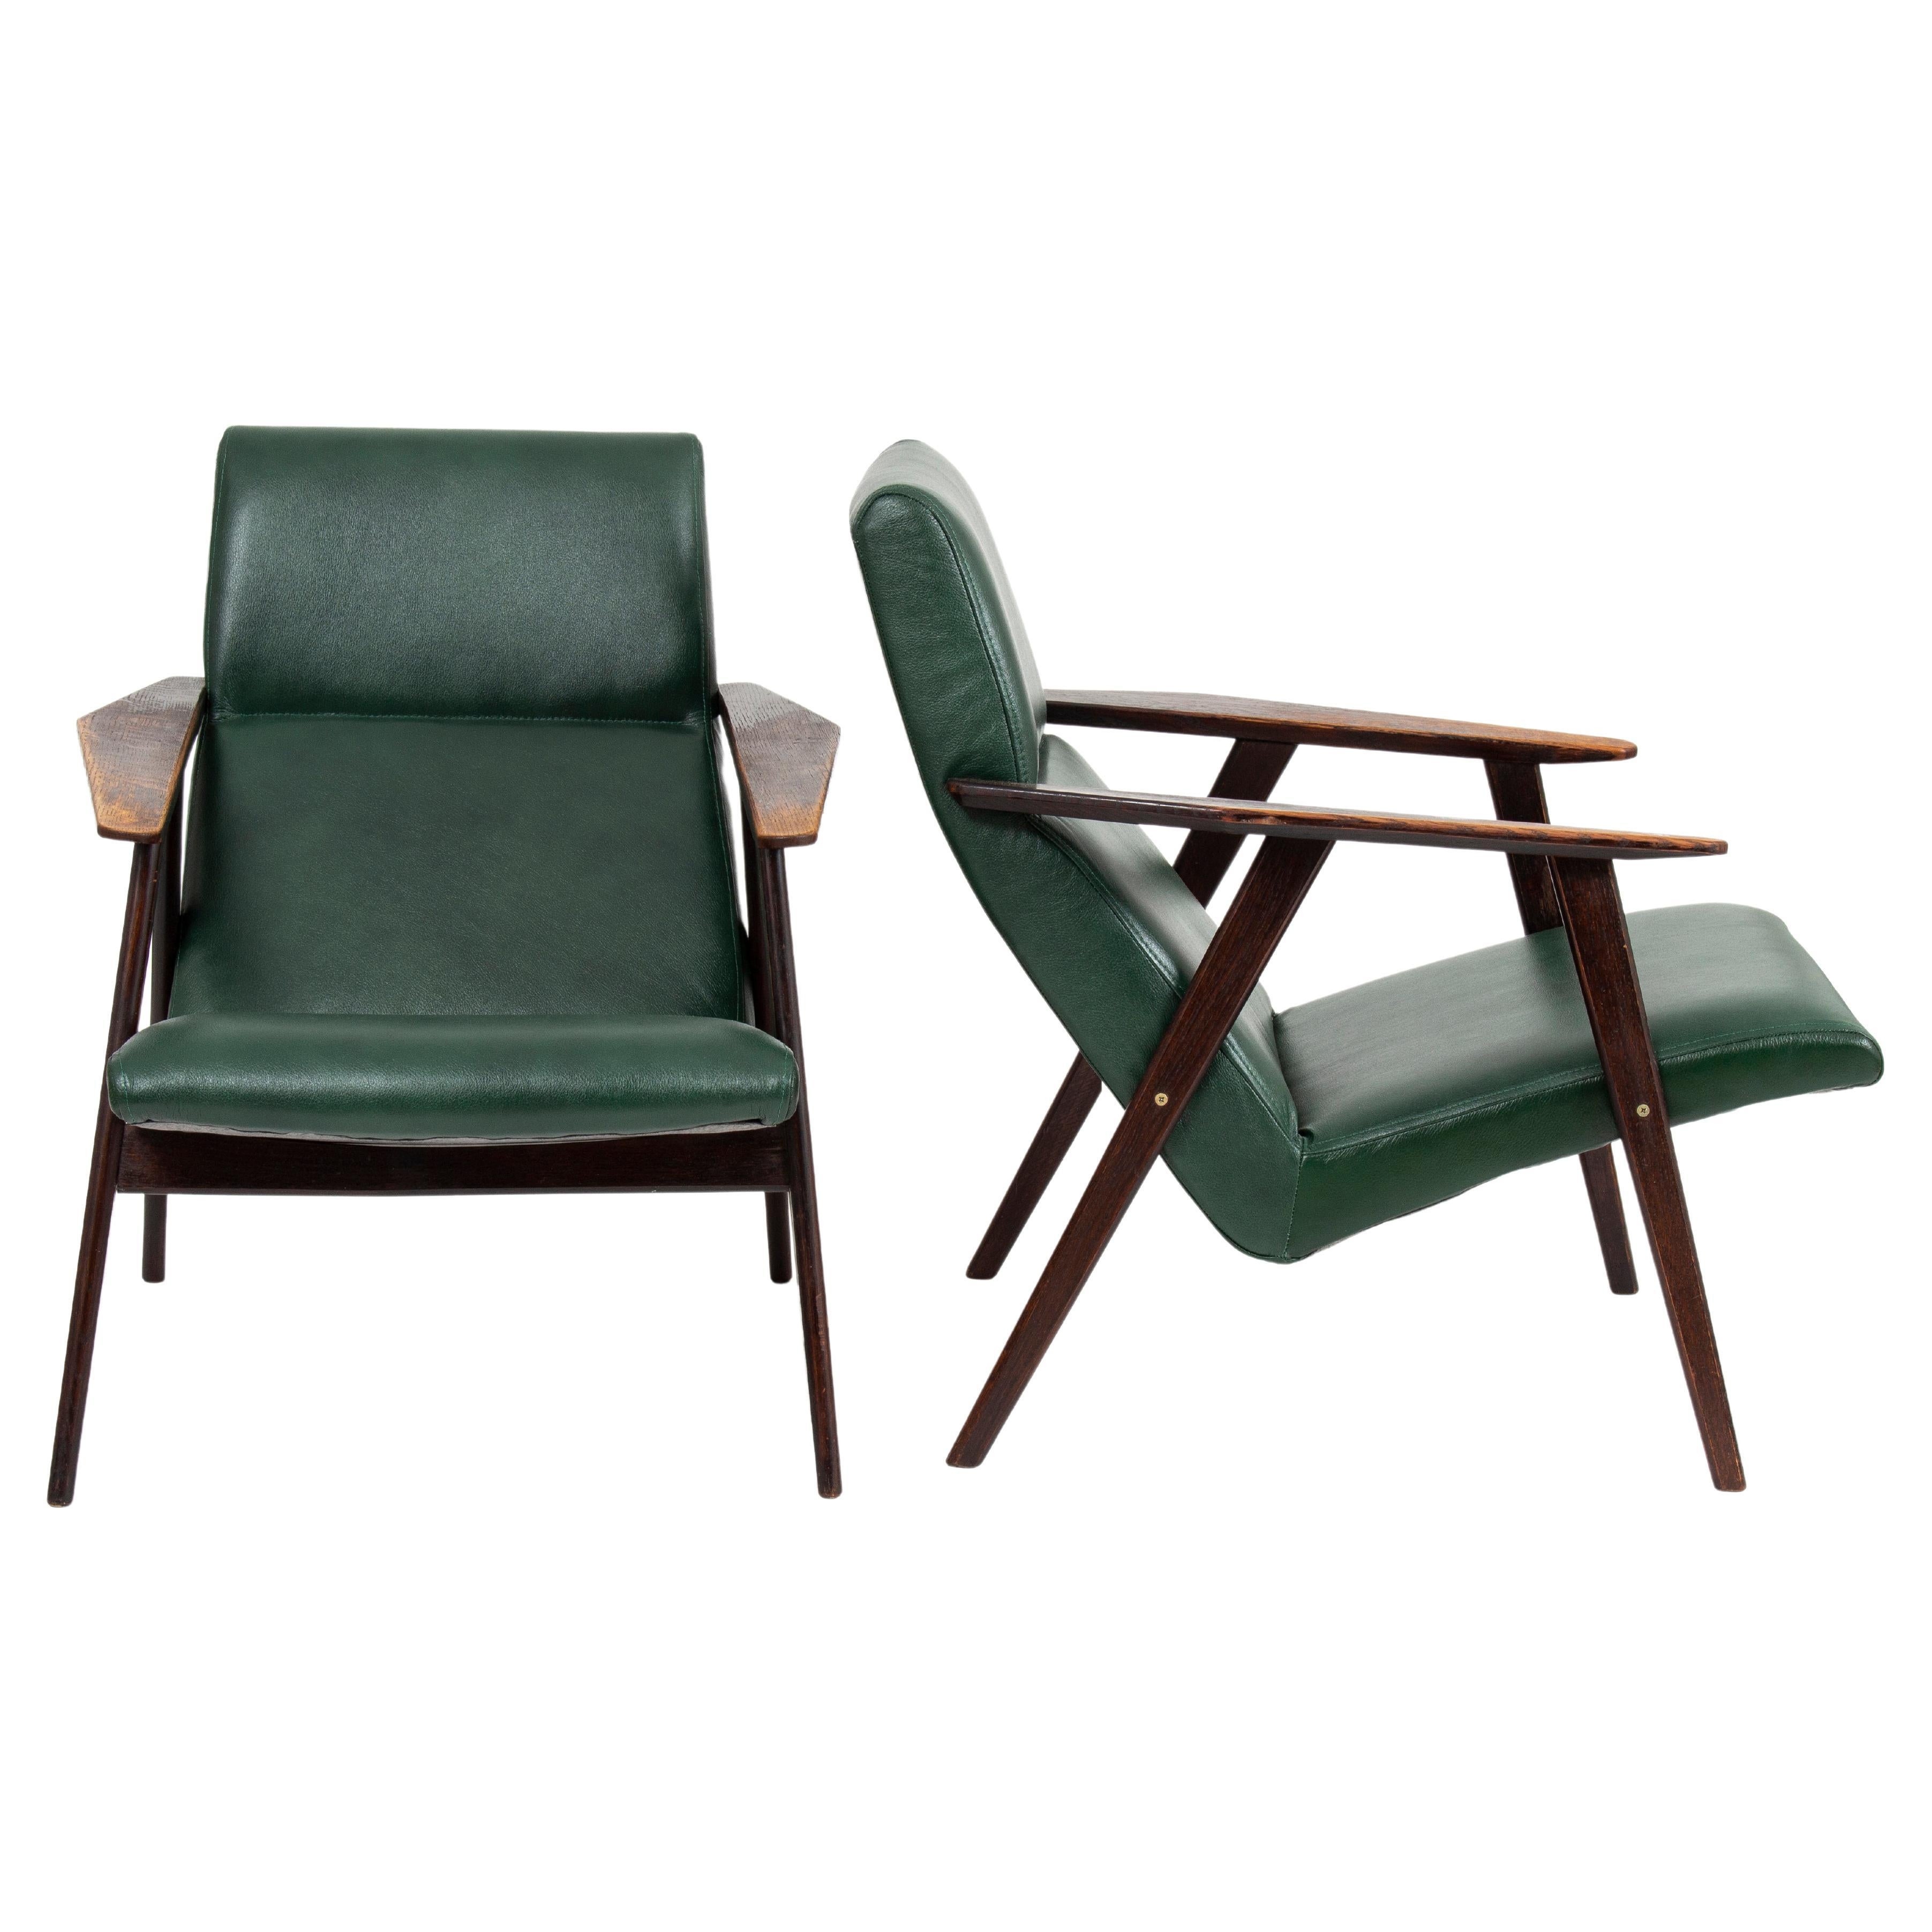 Mid-Century Modern Armchairs in Pair, ca. 1960s '2 Pieces'